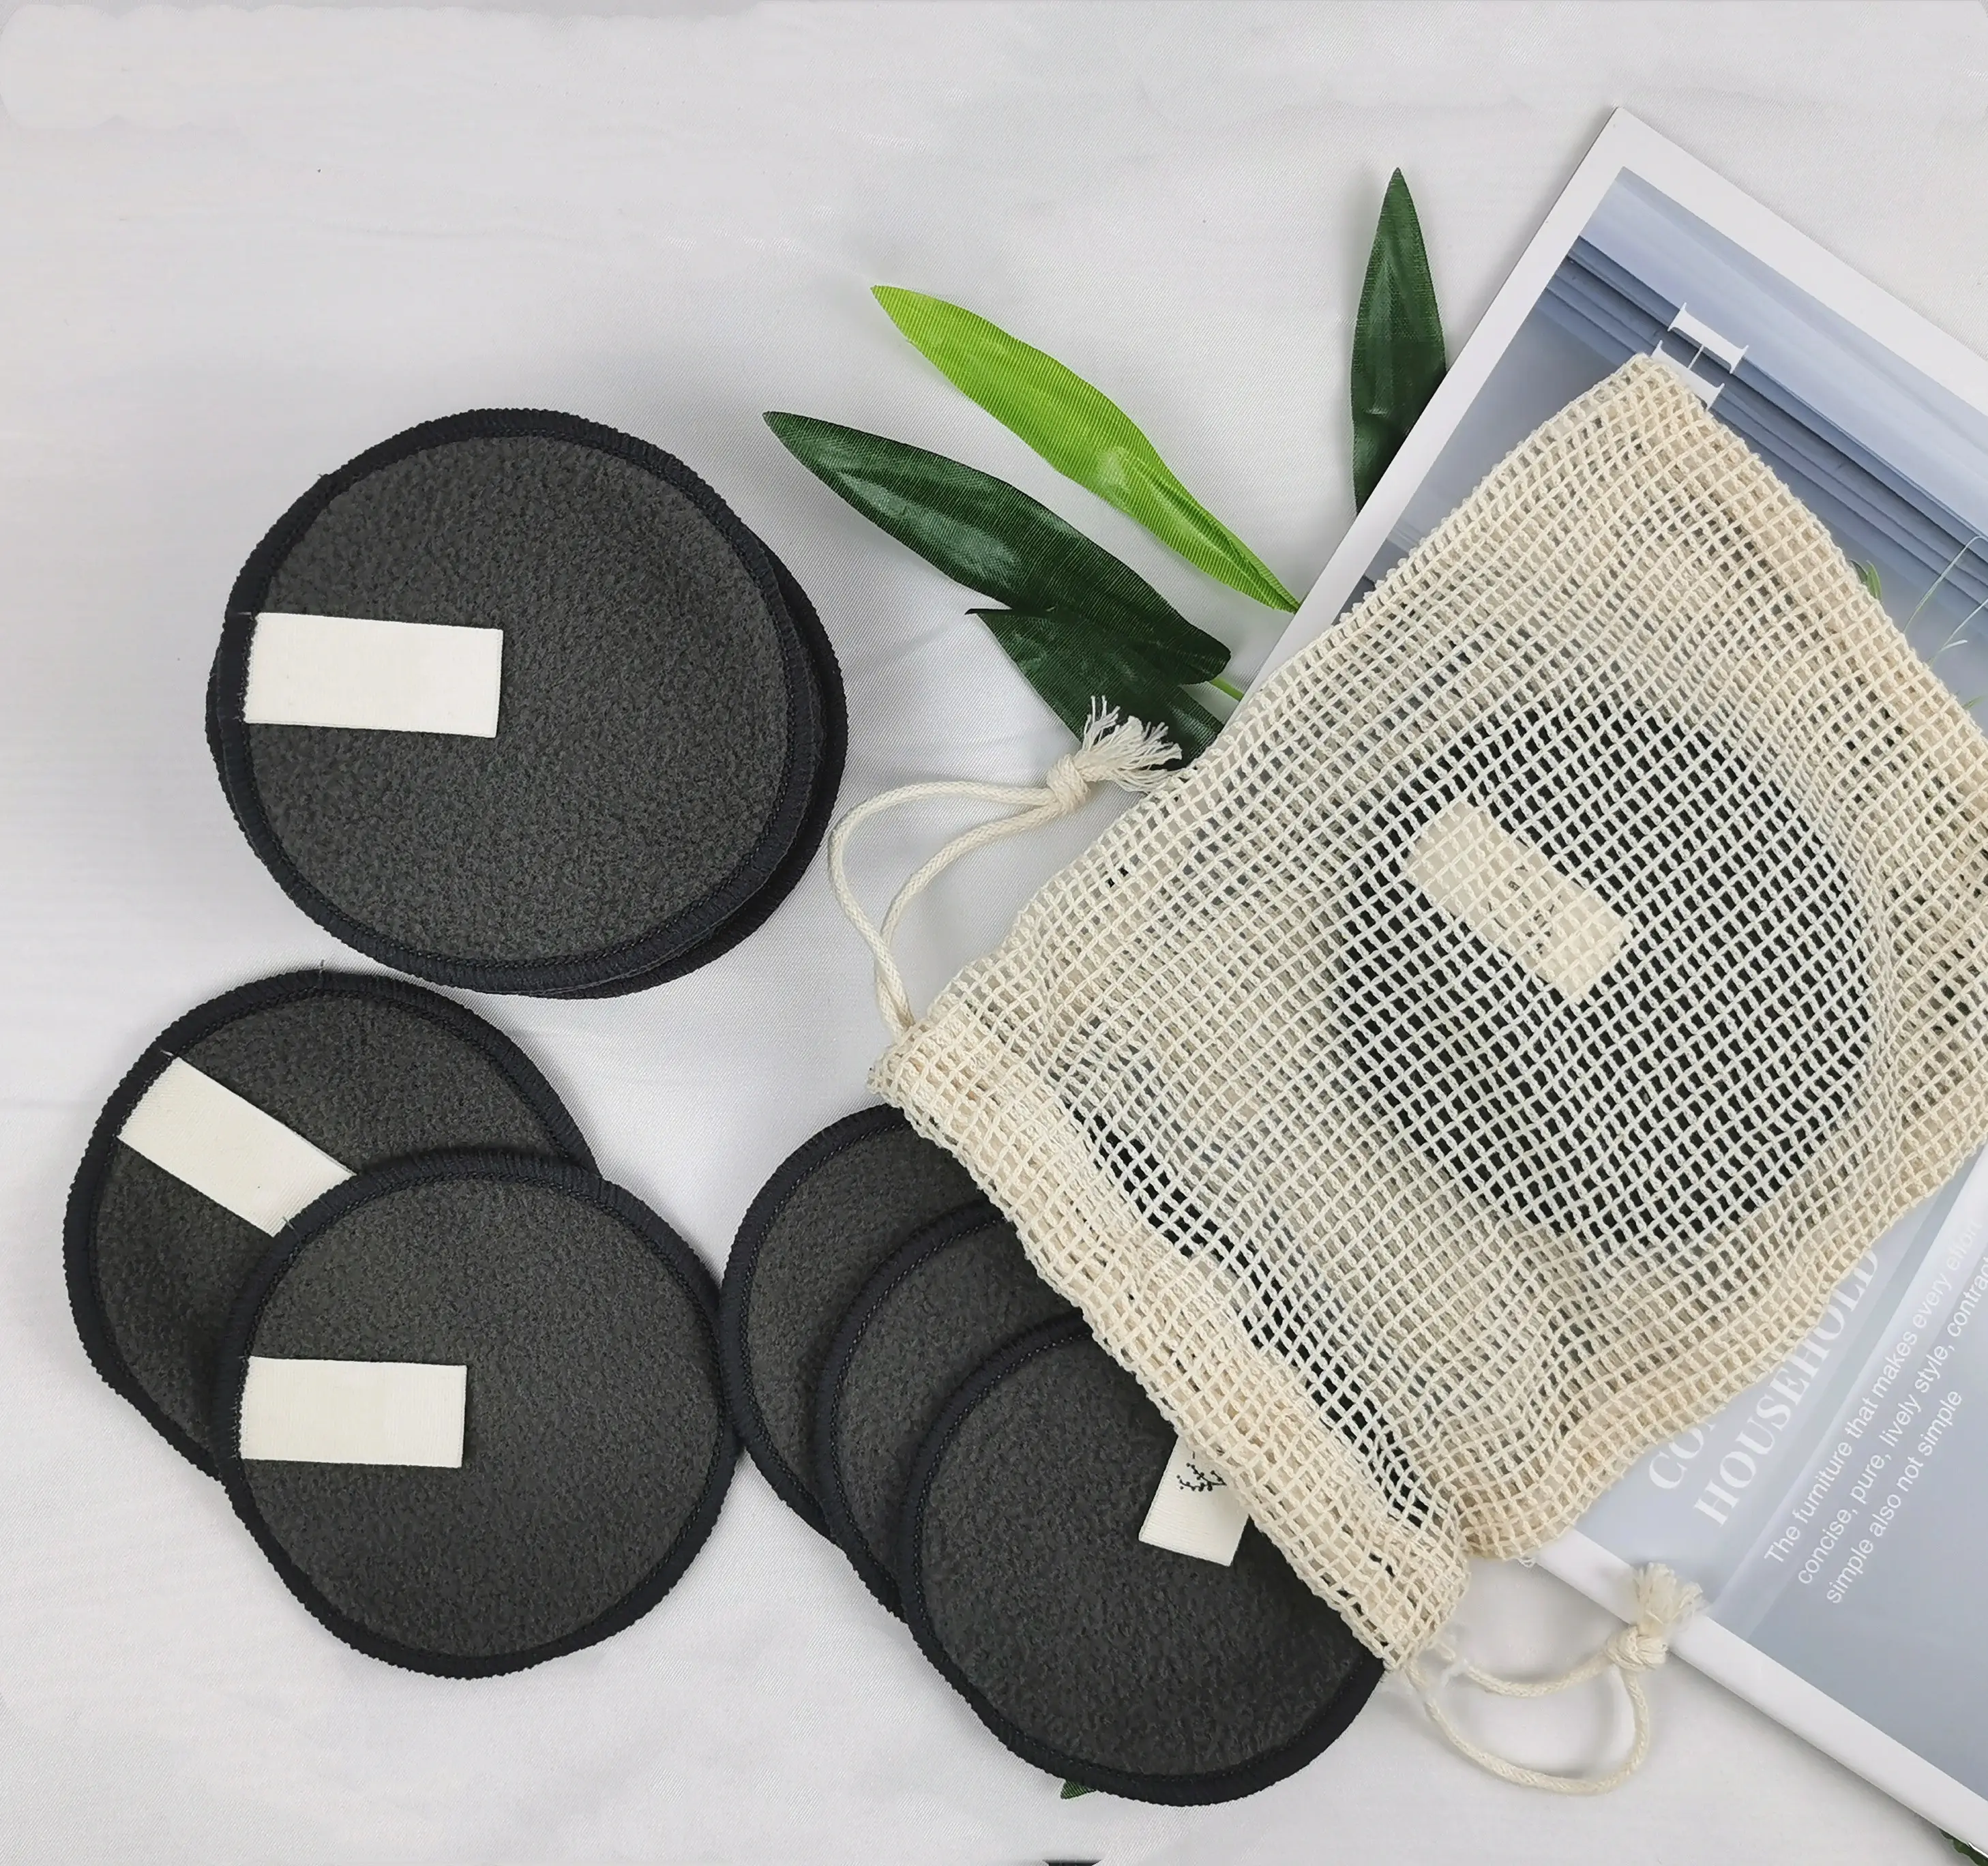 Reusable Makeup Remover Cotton Natural 100% Pure Cotton Reusable Make Up Pads Set Reusable Makeup Remover Pads In Box Makeup Cleansing Pad